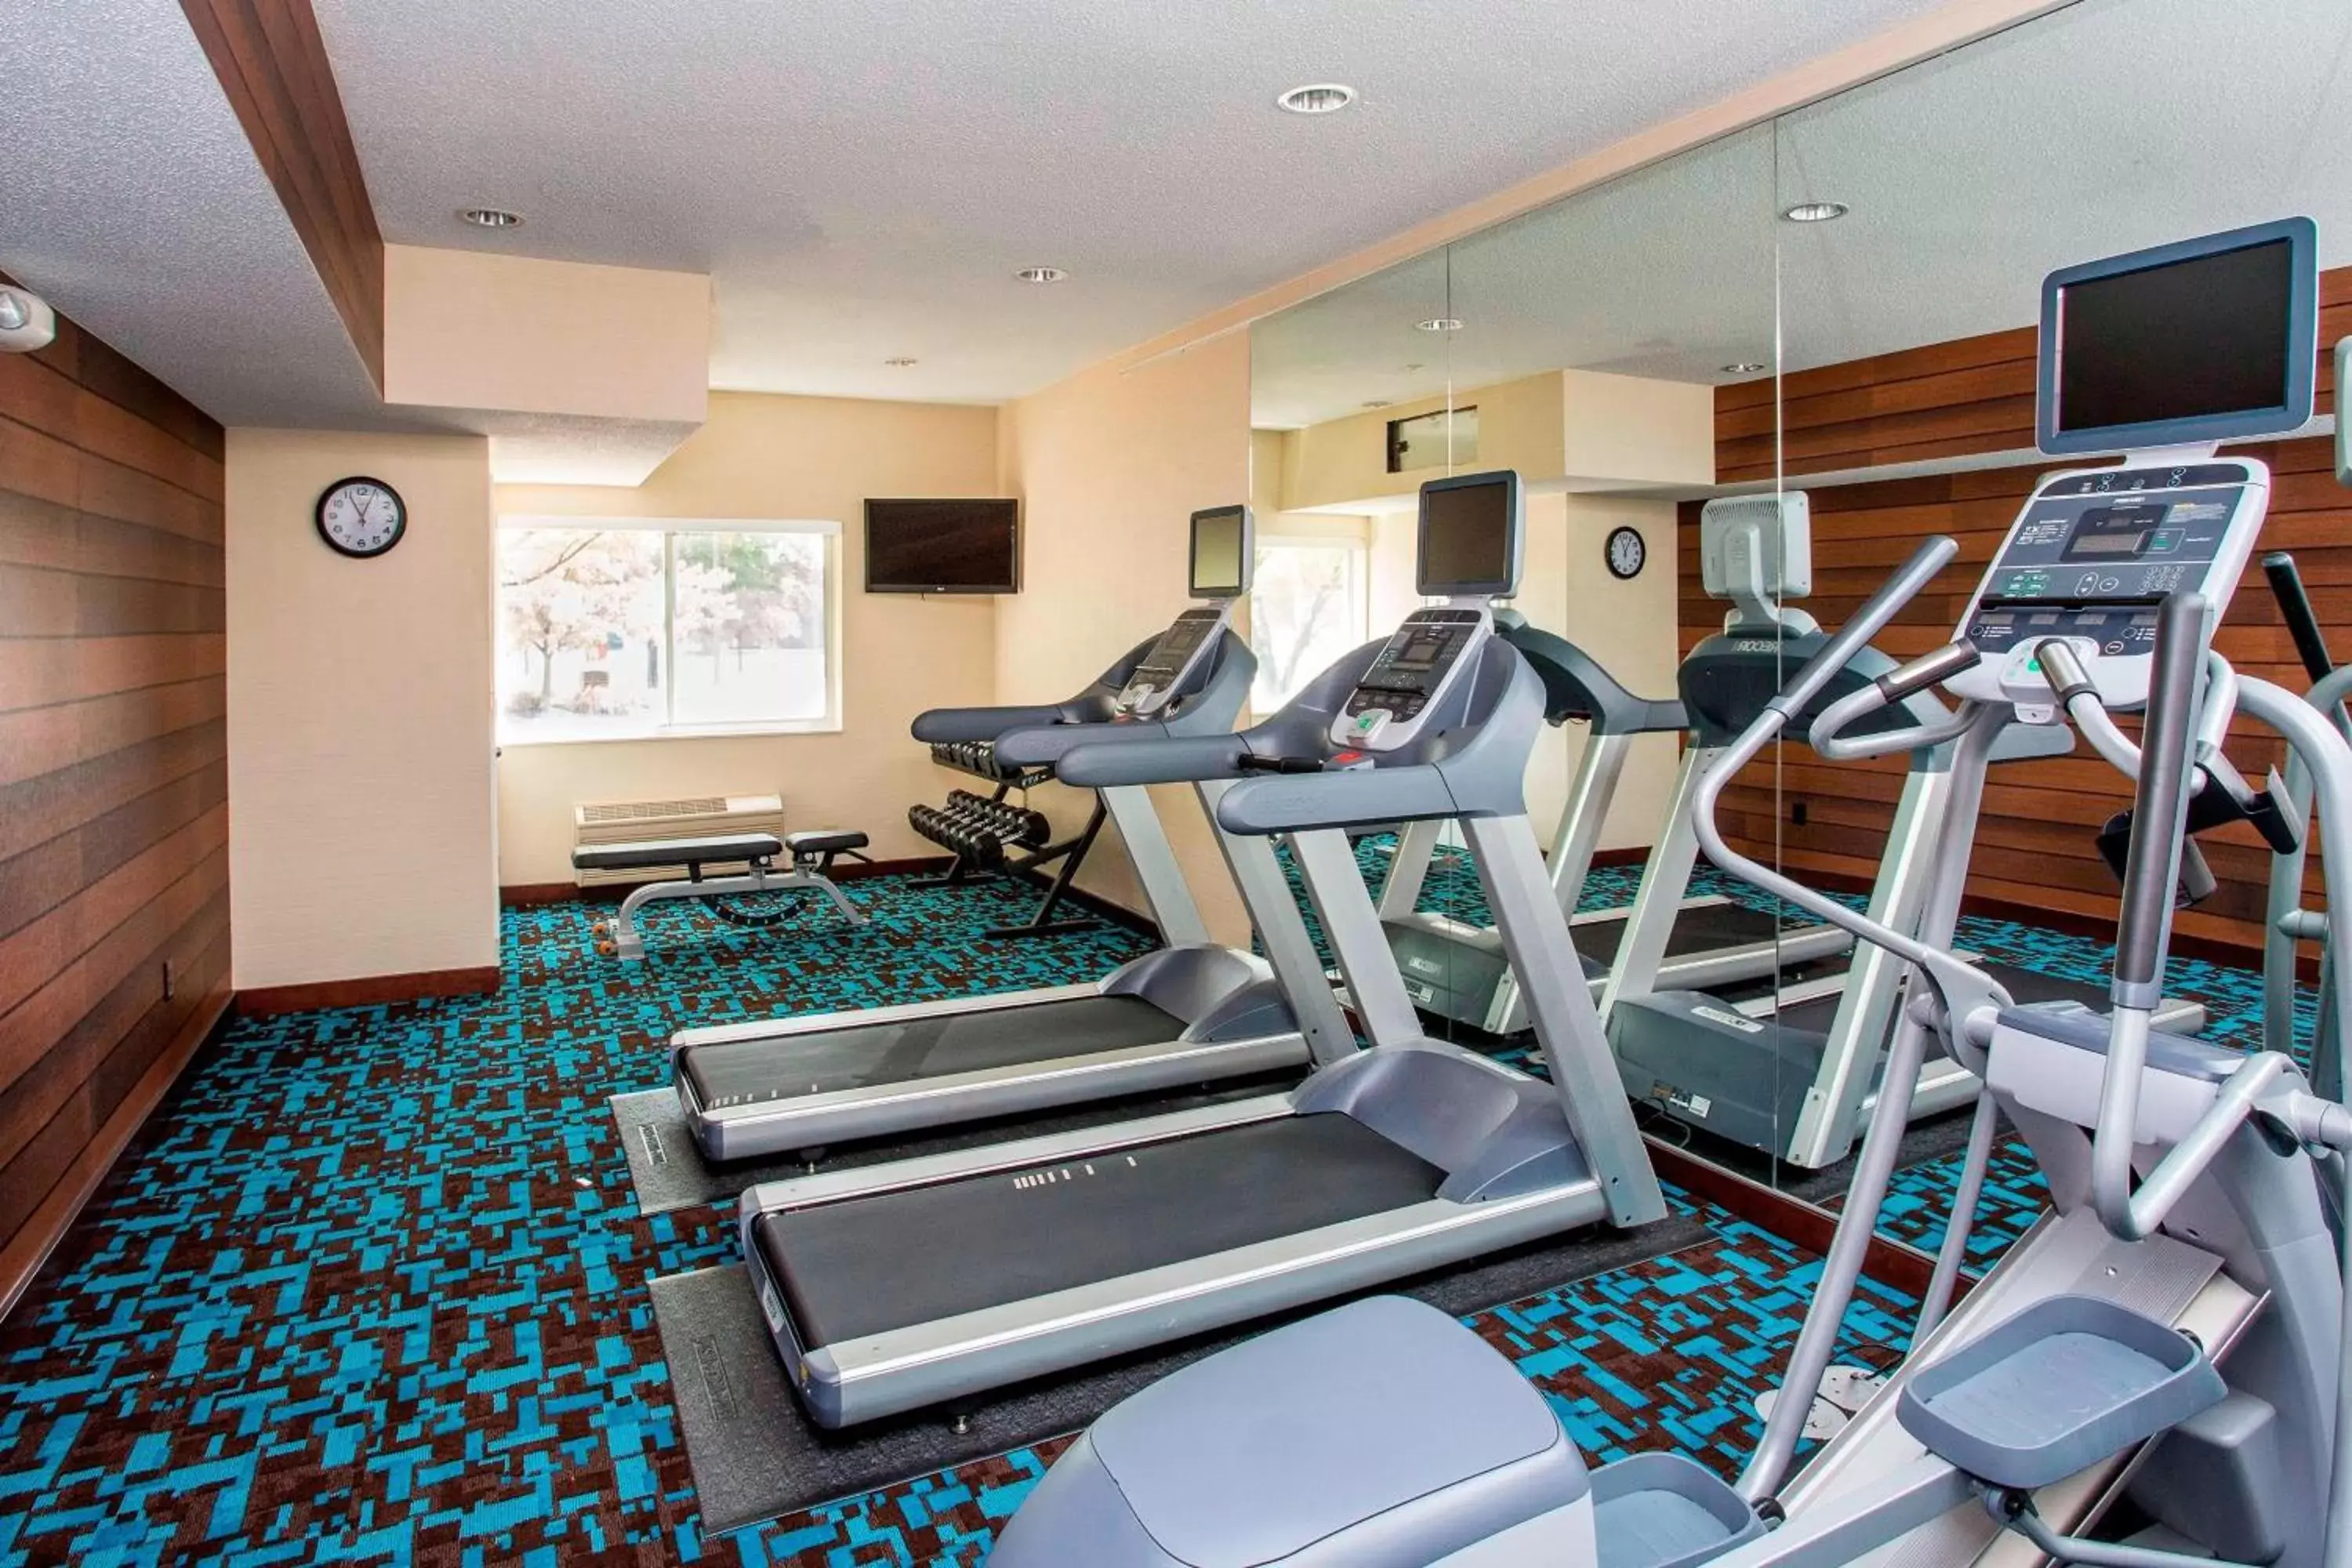 Fitness centre/facilities, Fitness Center/Facilities in Fairfield Inn & Suites by Marriott Dayton South